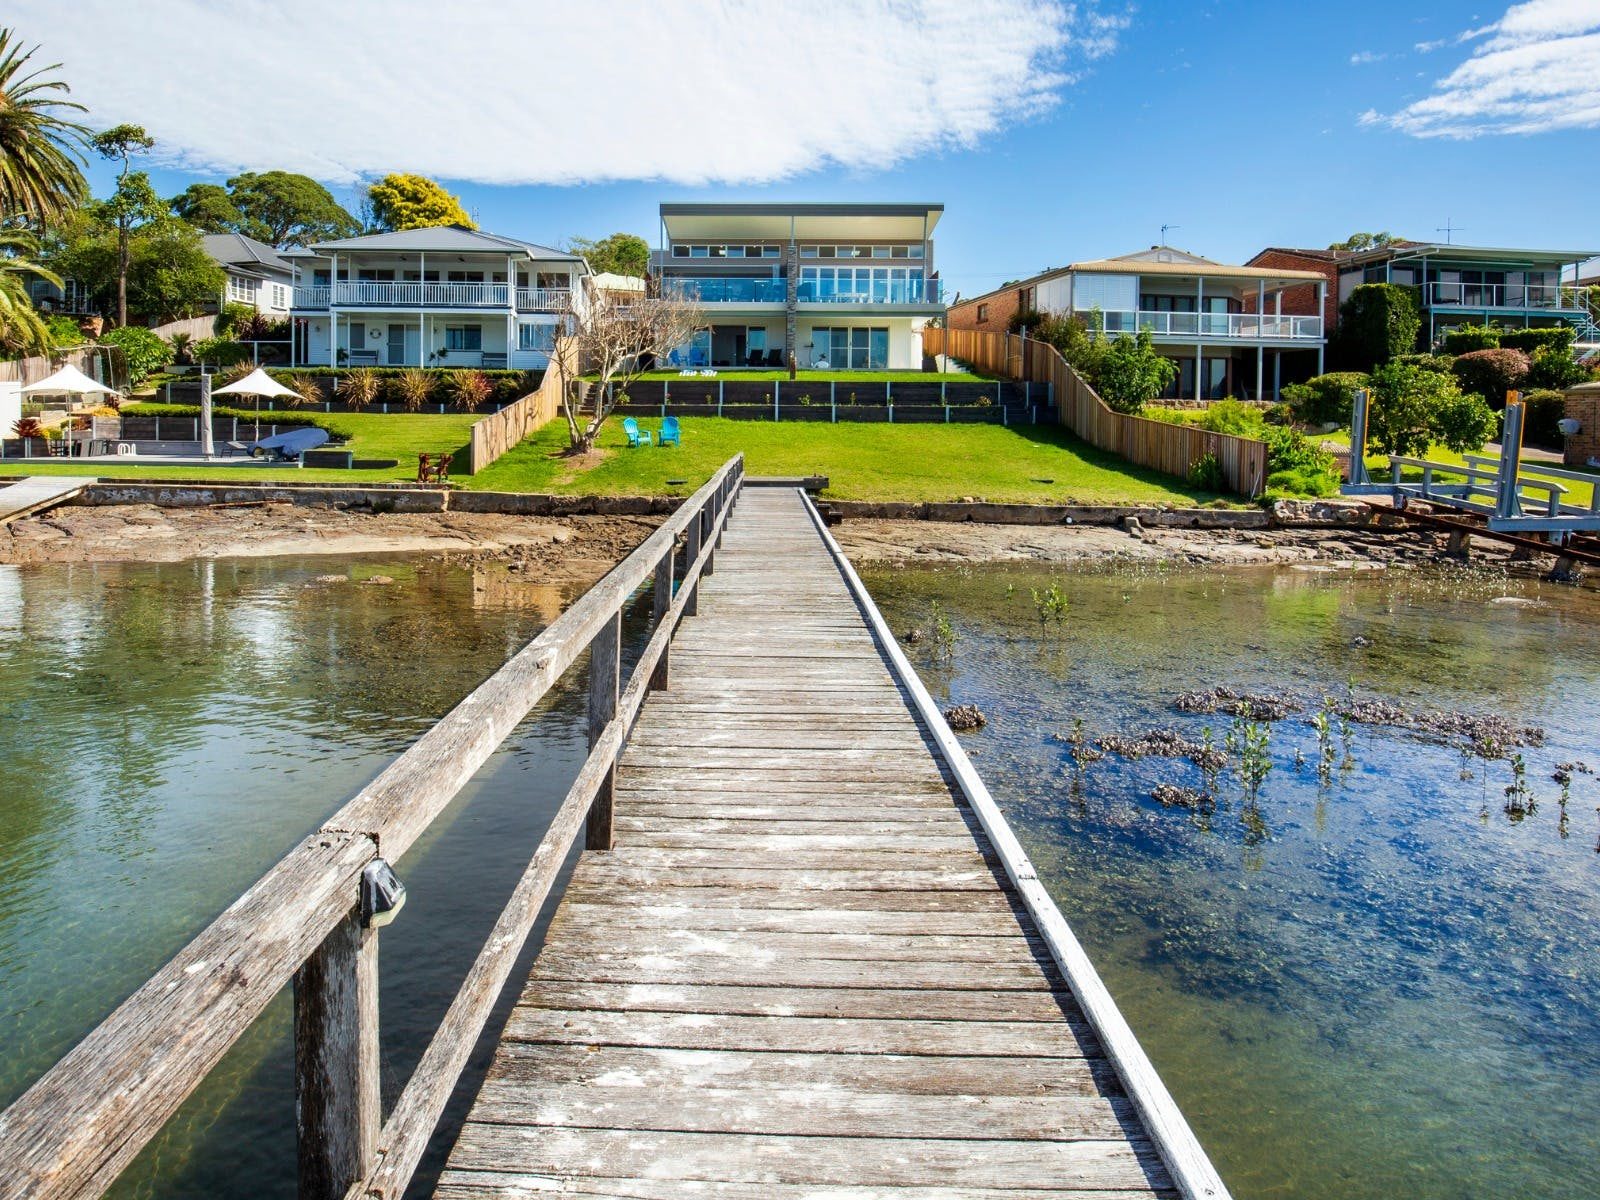 External view from the Jetty to the duplex